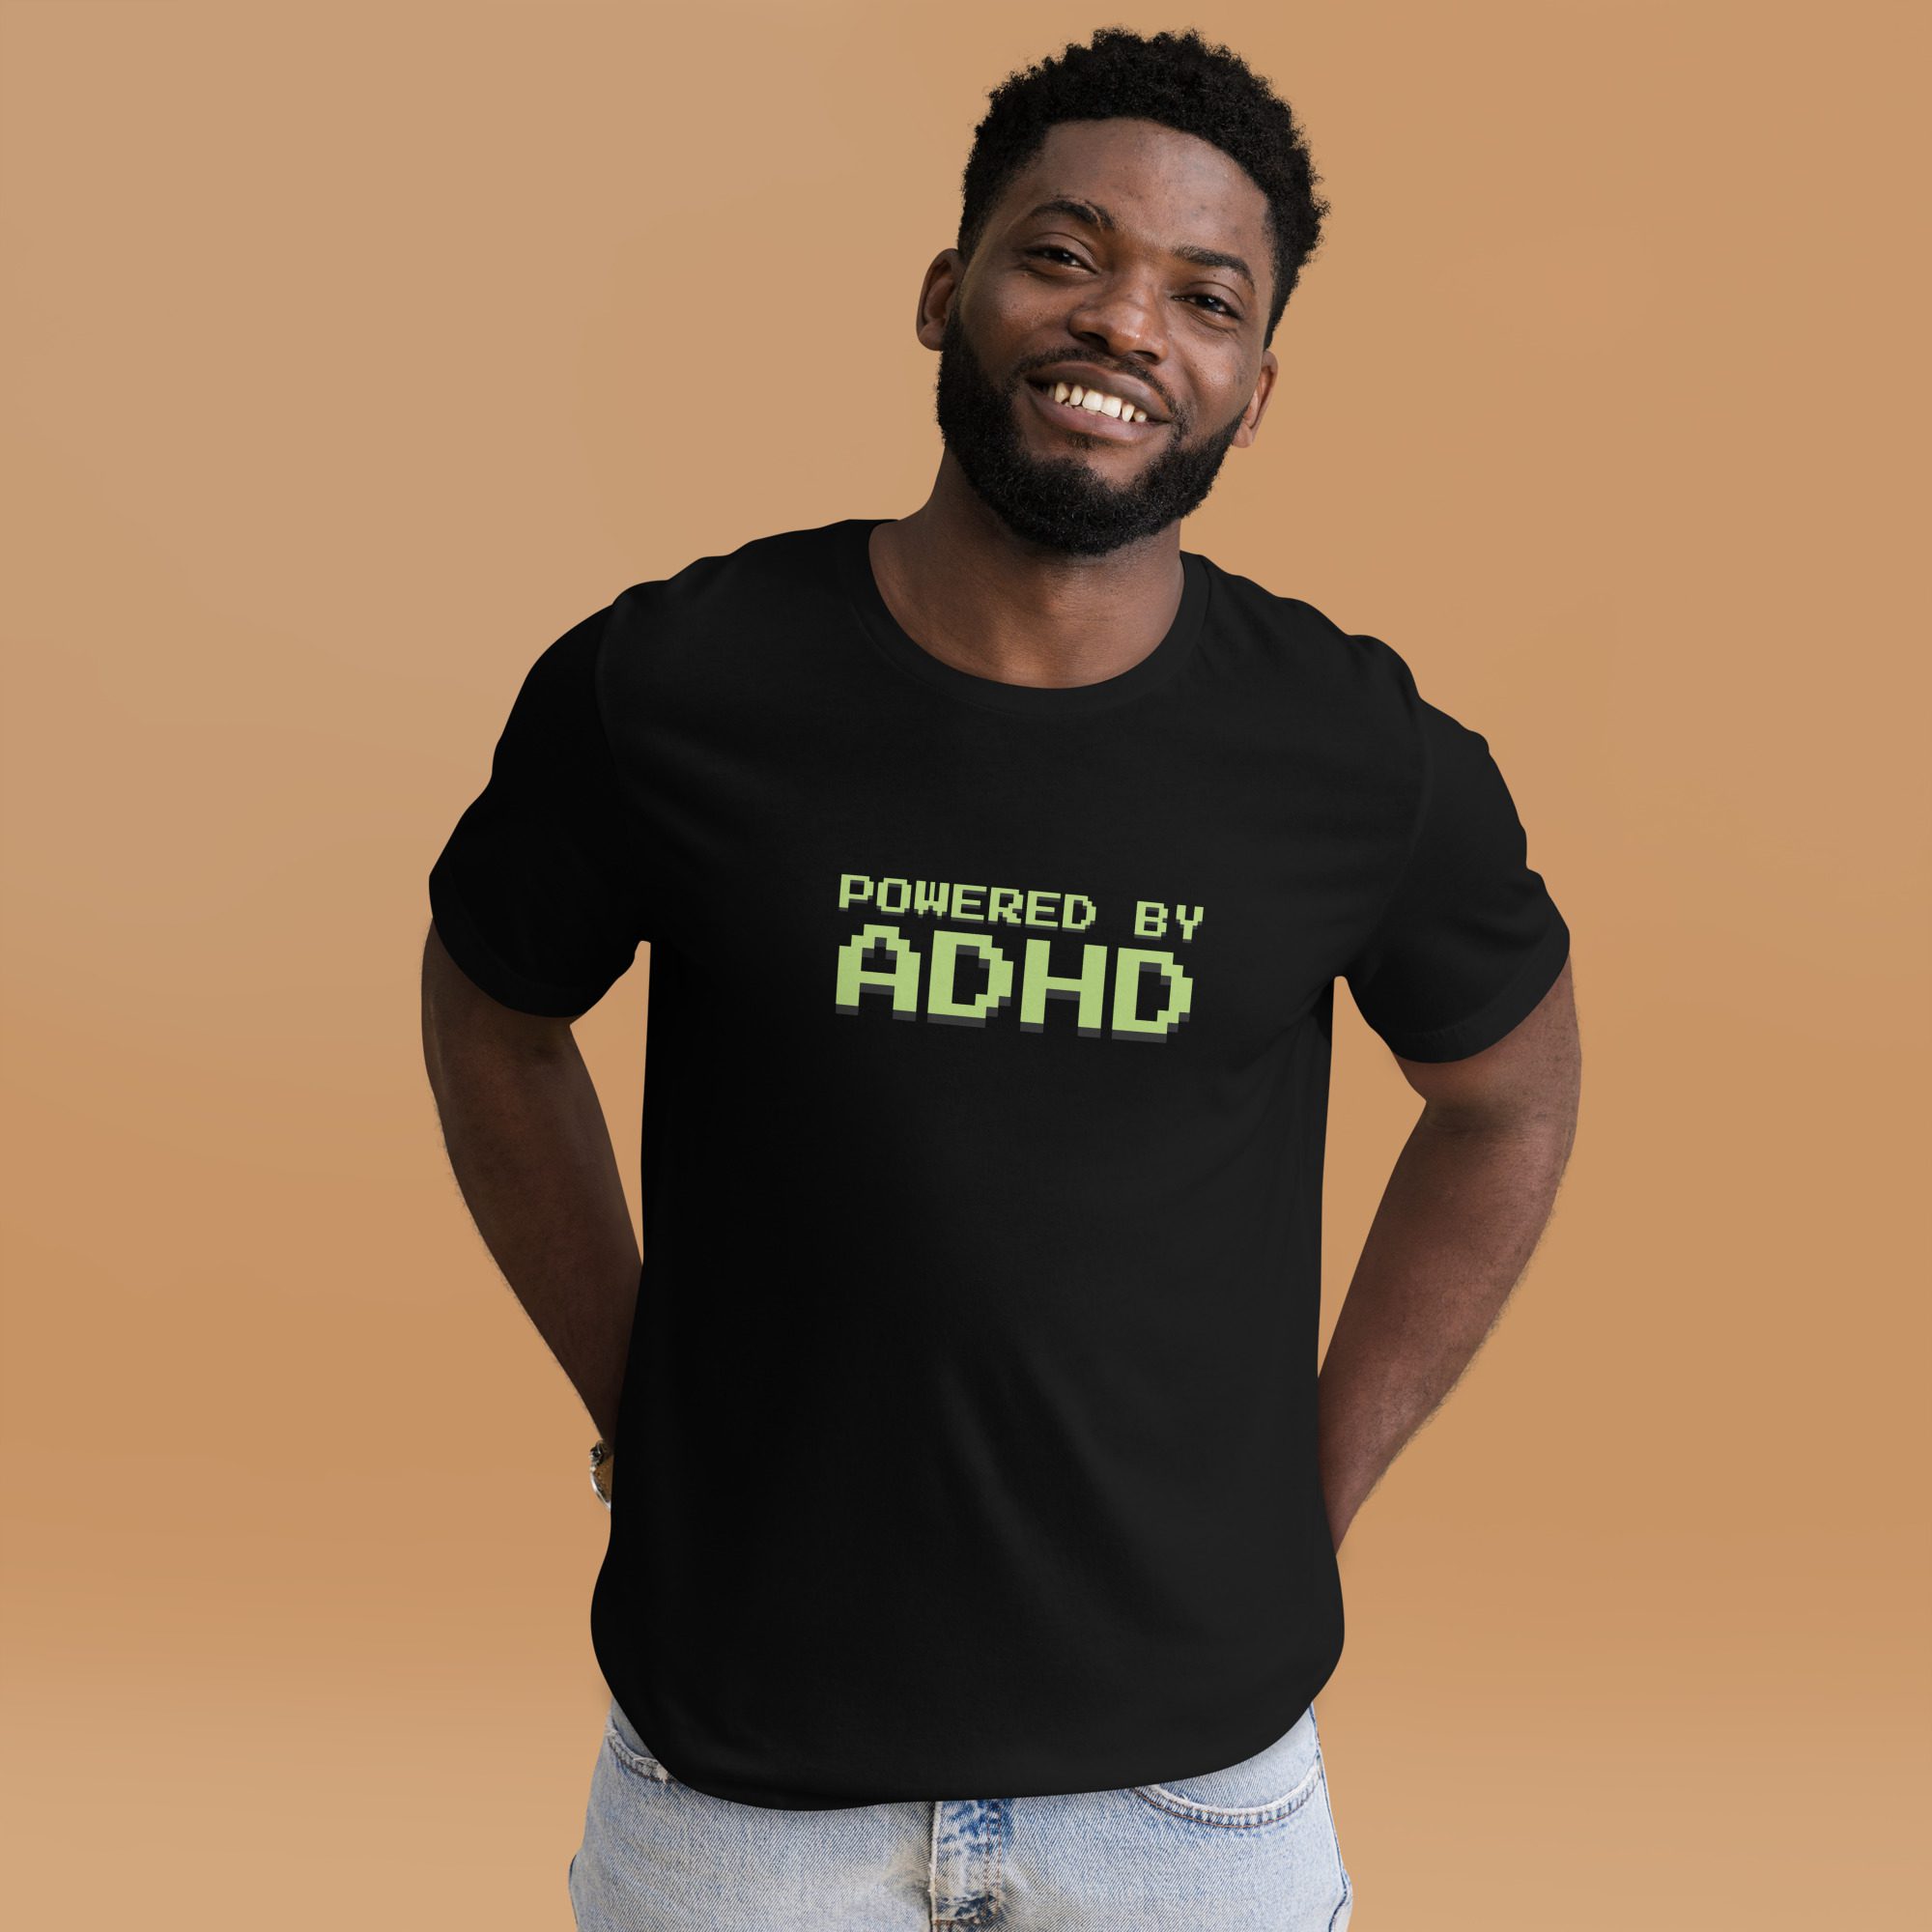 Powered By ADHD Unisex T-shirt